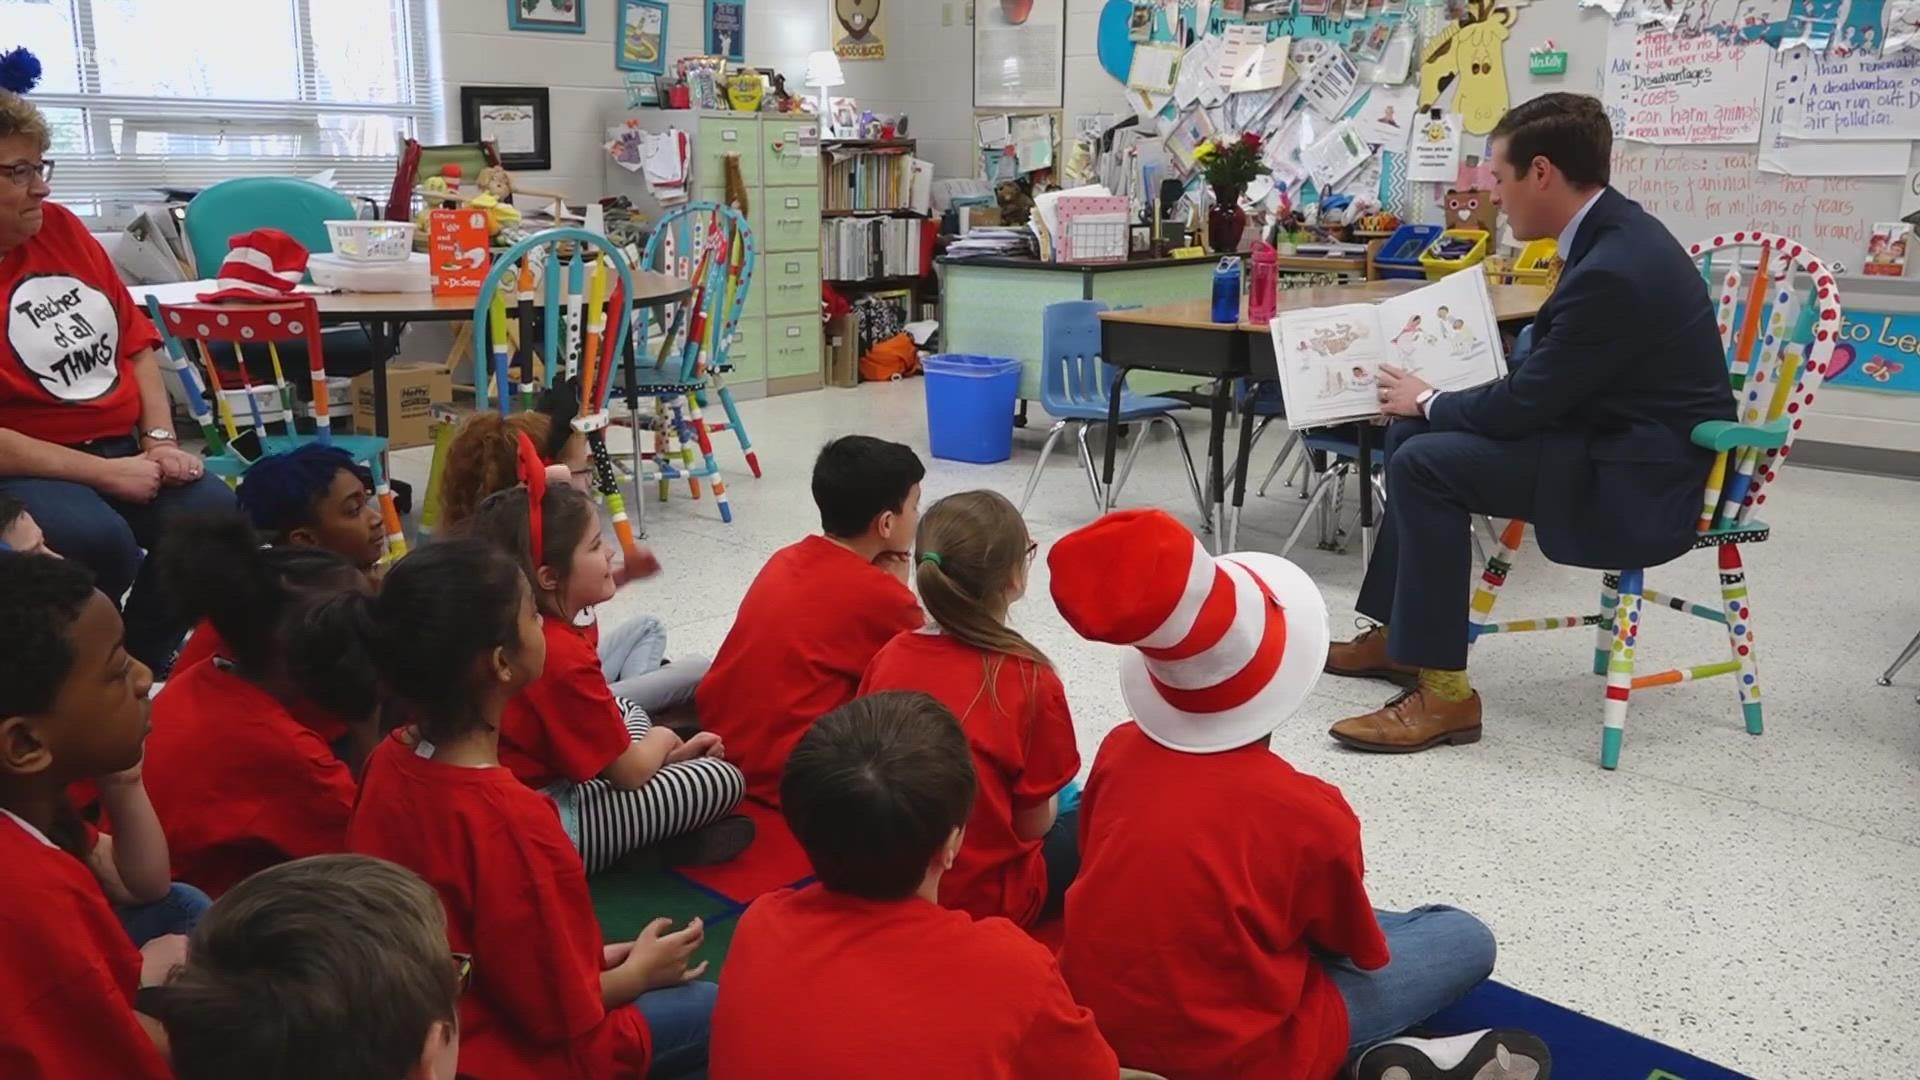 Our very own Dan Kennedy reflects on his past participation in the national day of literacy celebration at a Virginia Beach classroom.